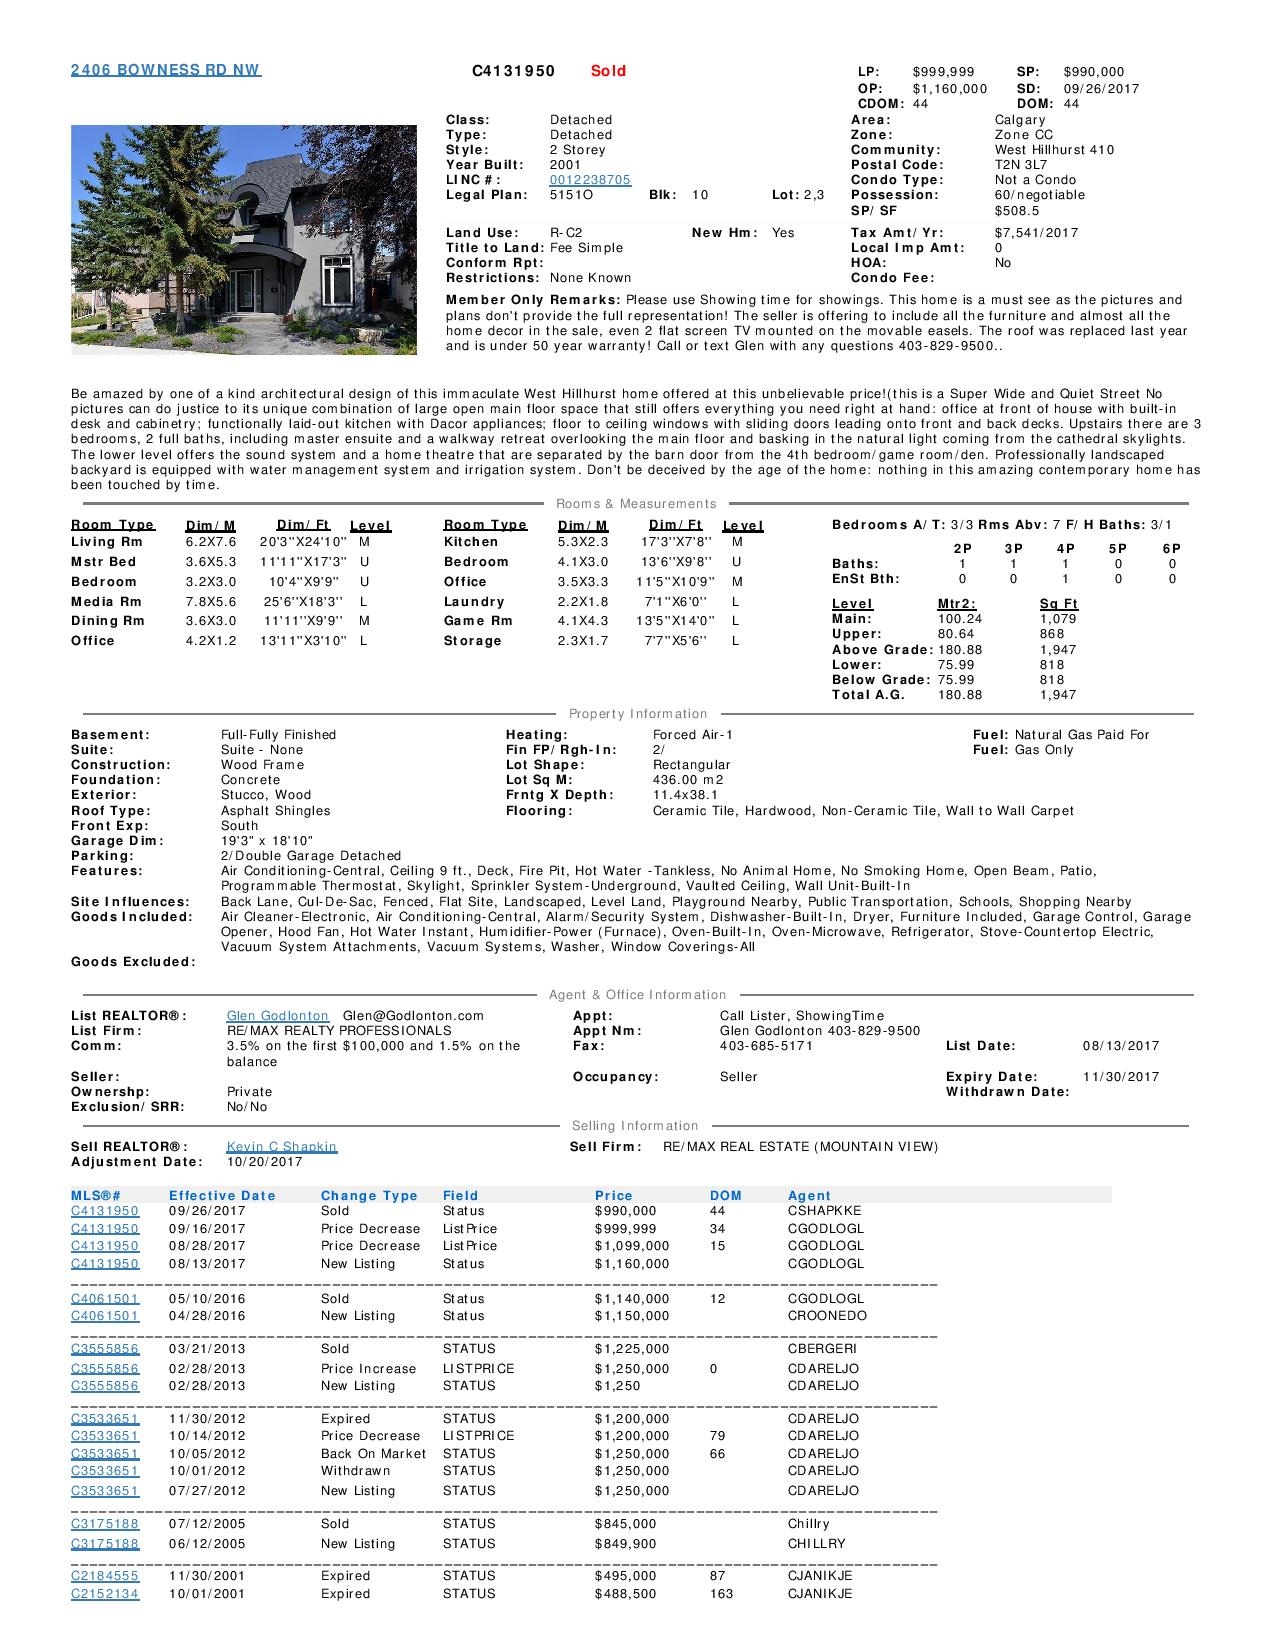 Sold Listing 2406 Bowness Road NW Lefter page 001 | Sold - West Hillhurst Listing